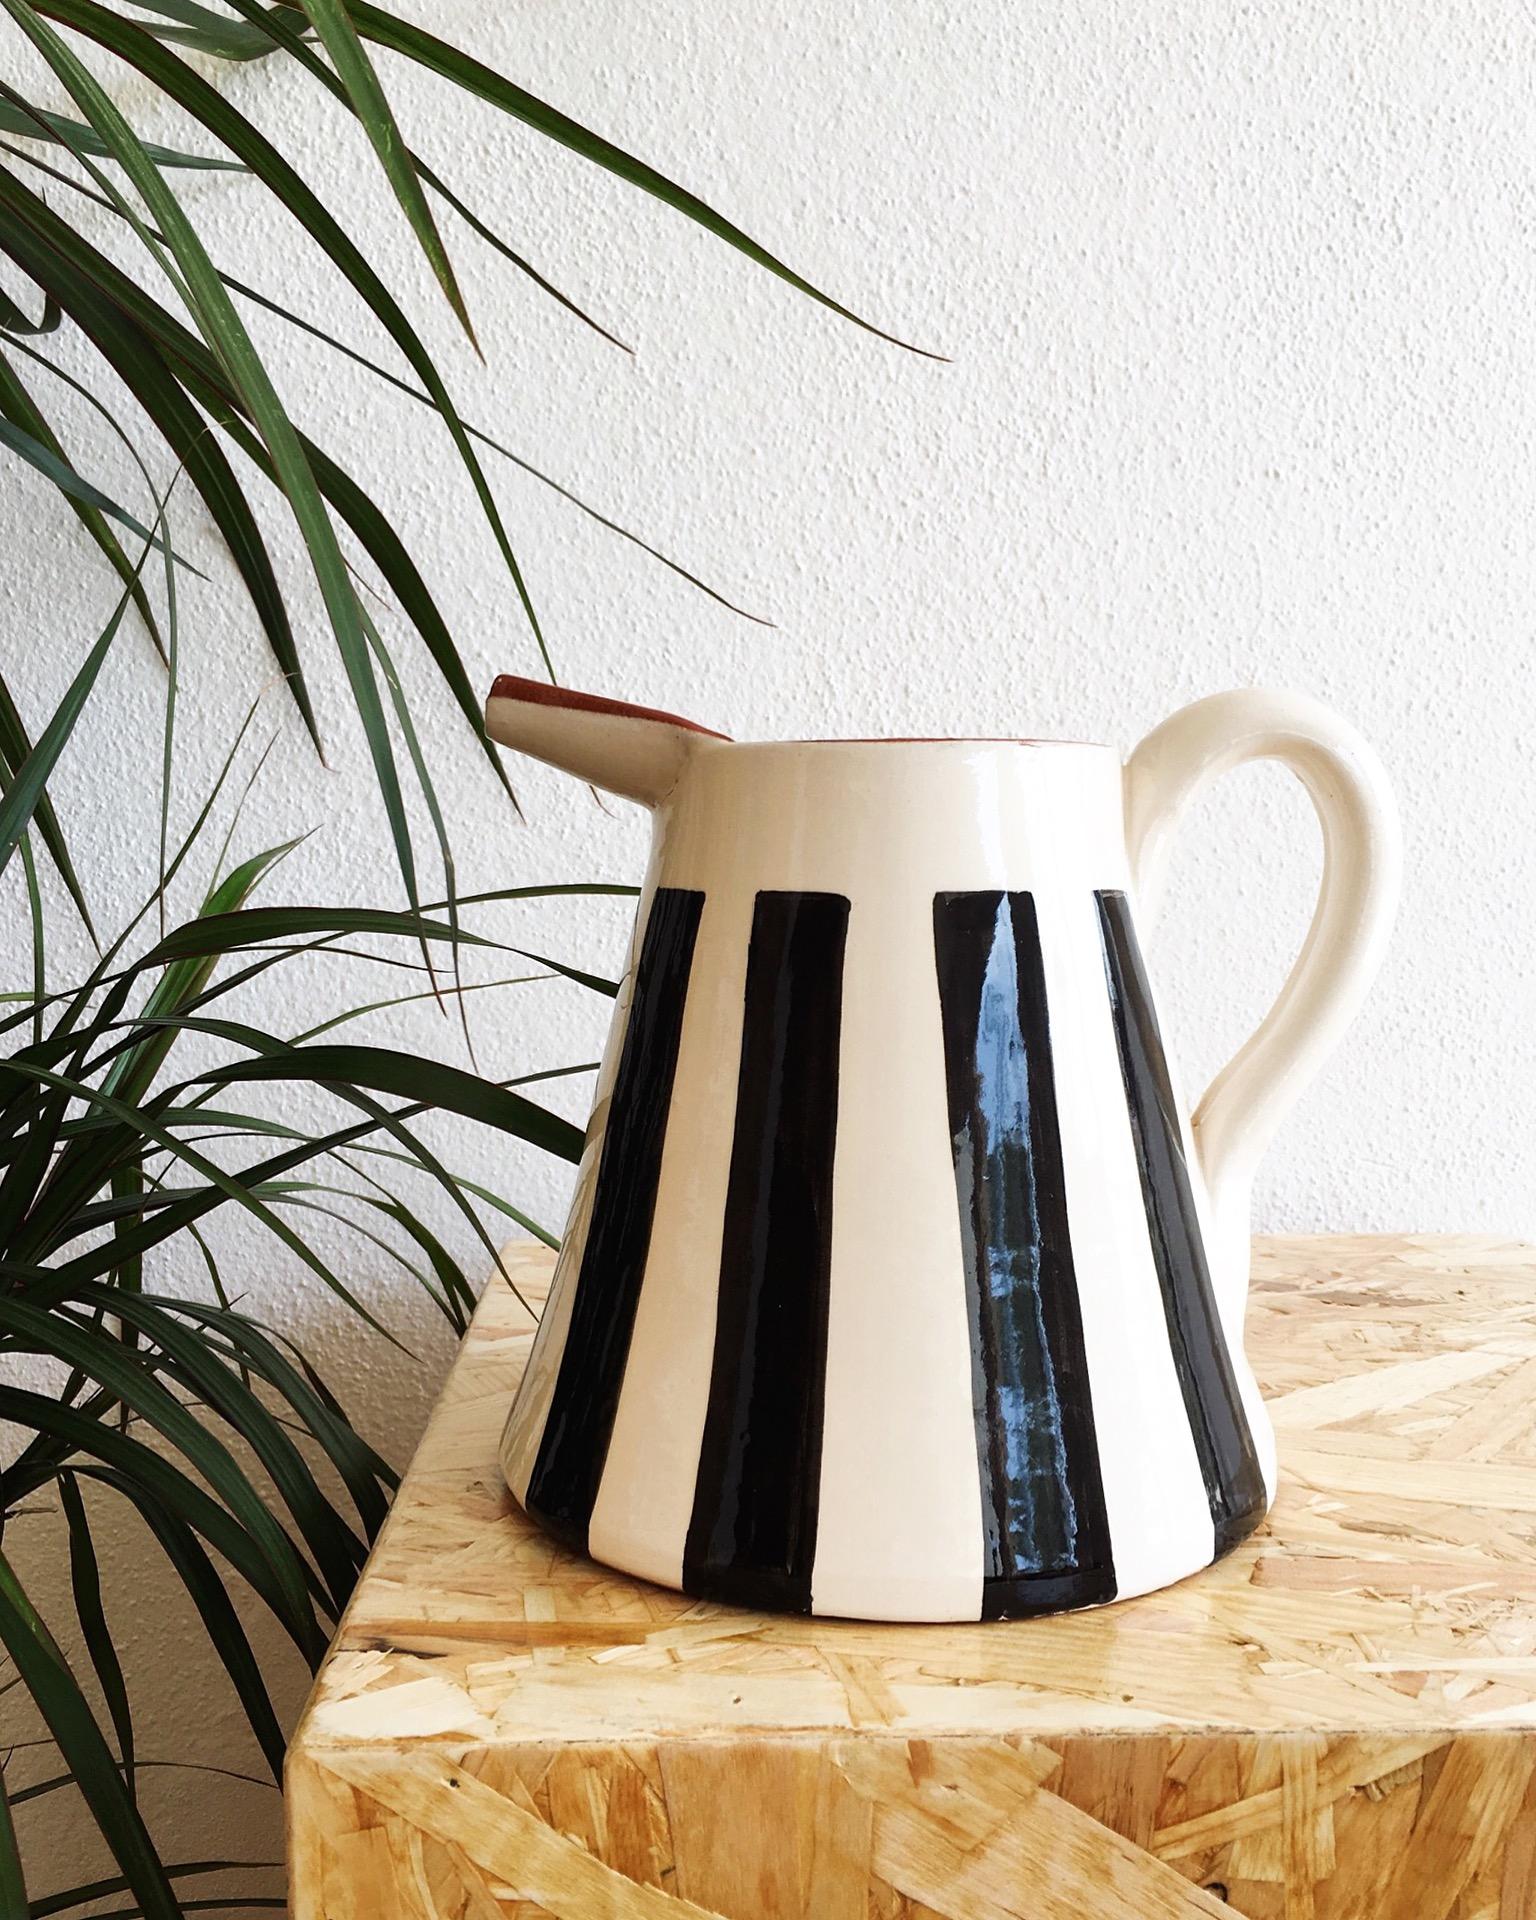 Hand-Painted Handmade Ceramic Medium Pitcher with Graphic Black and White Design, in Stock